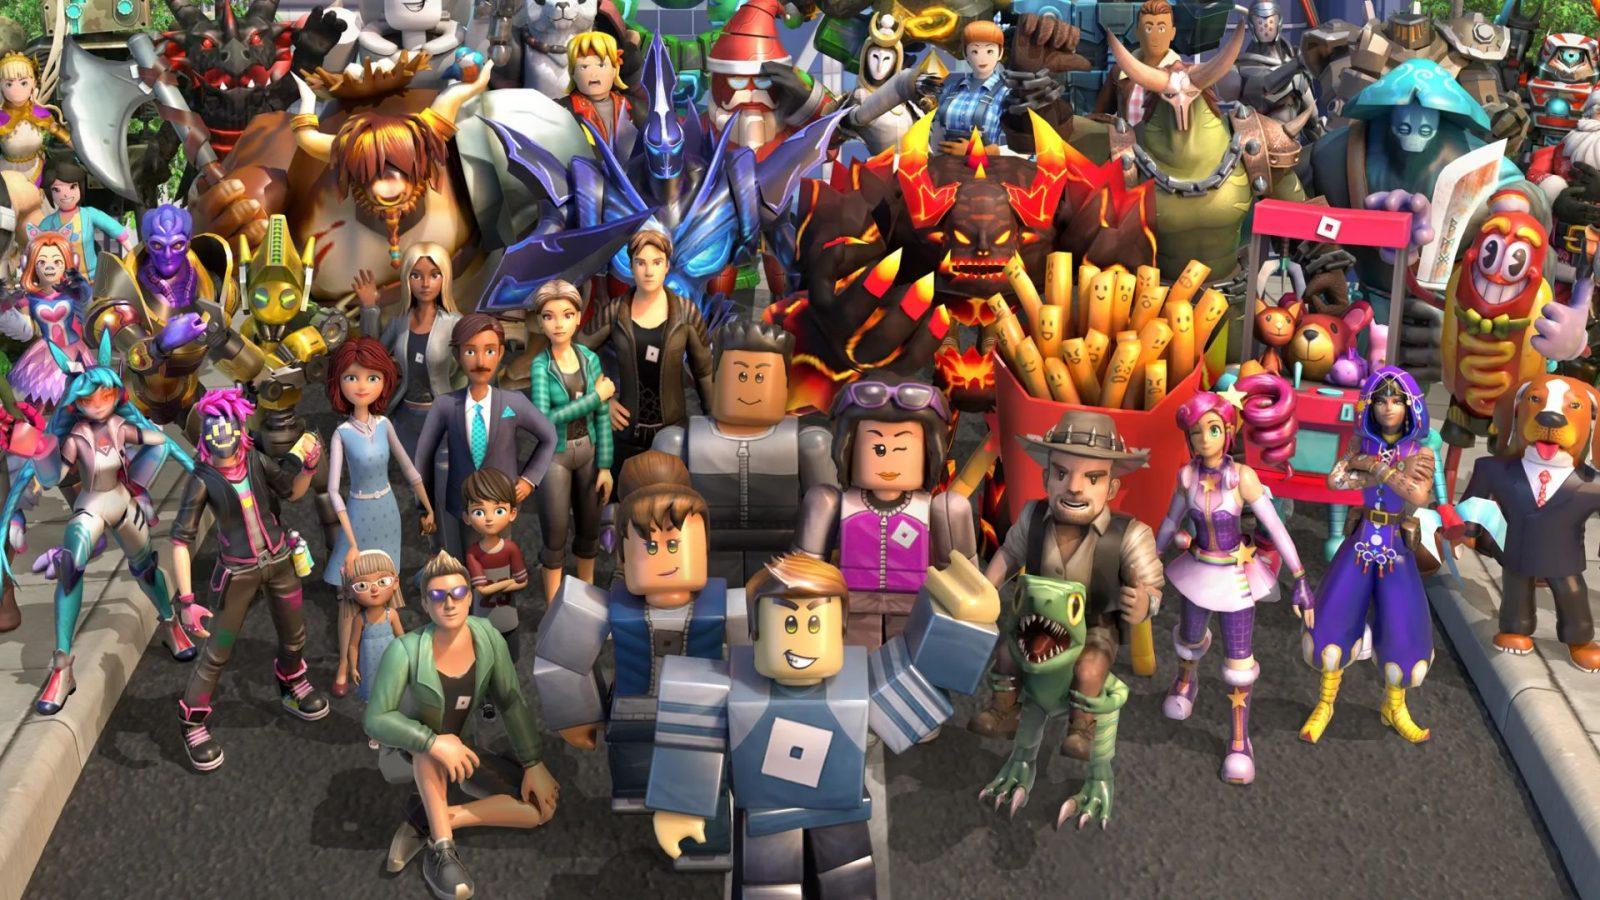 roblox characters stood together